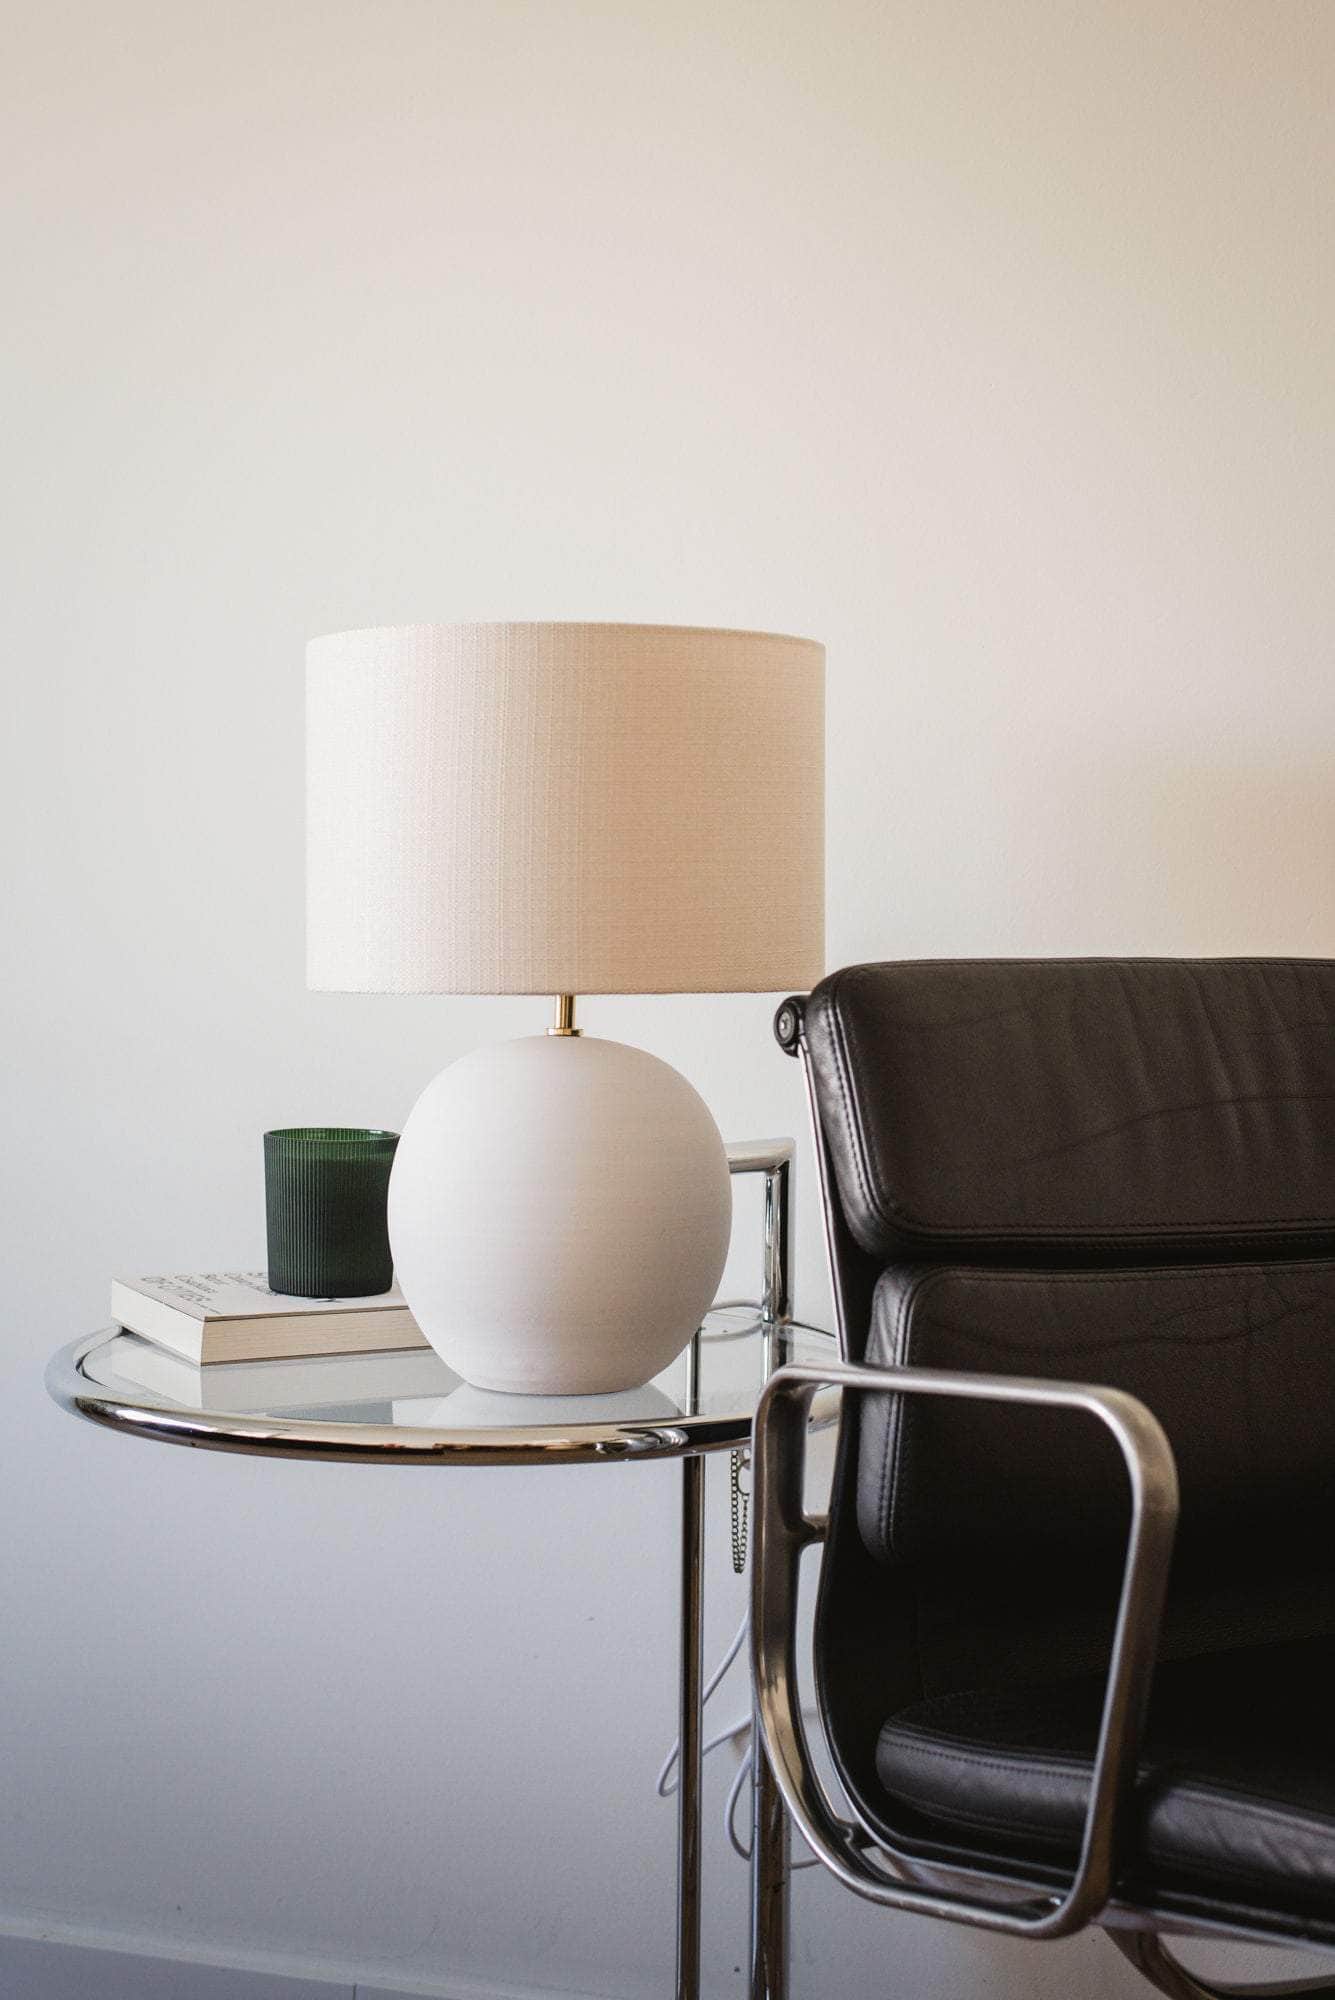 Load image into Gallery viewer, Kure Mate Table Lamp
